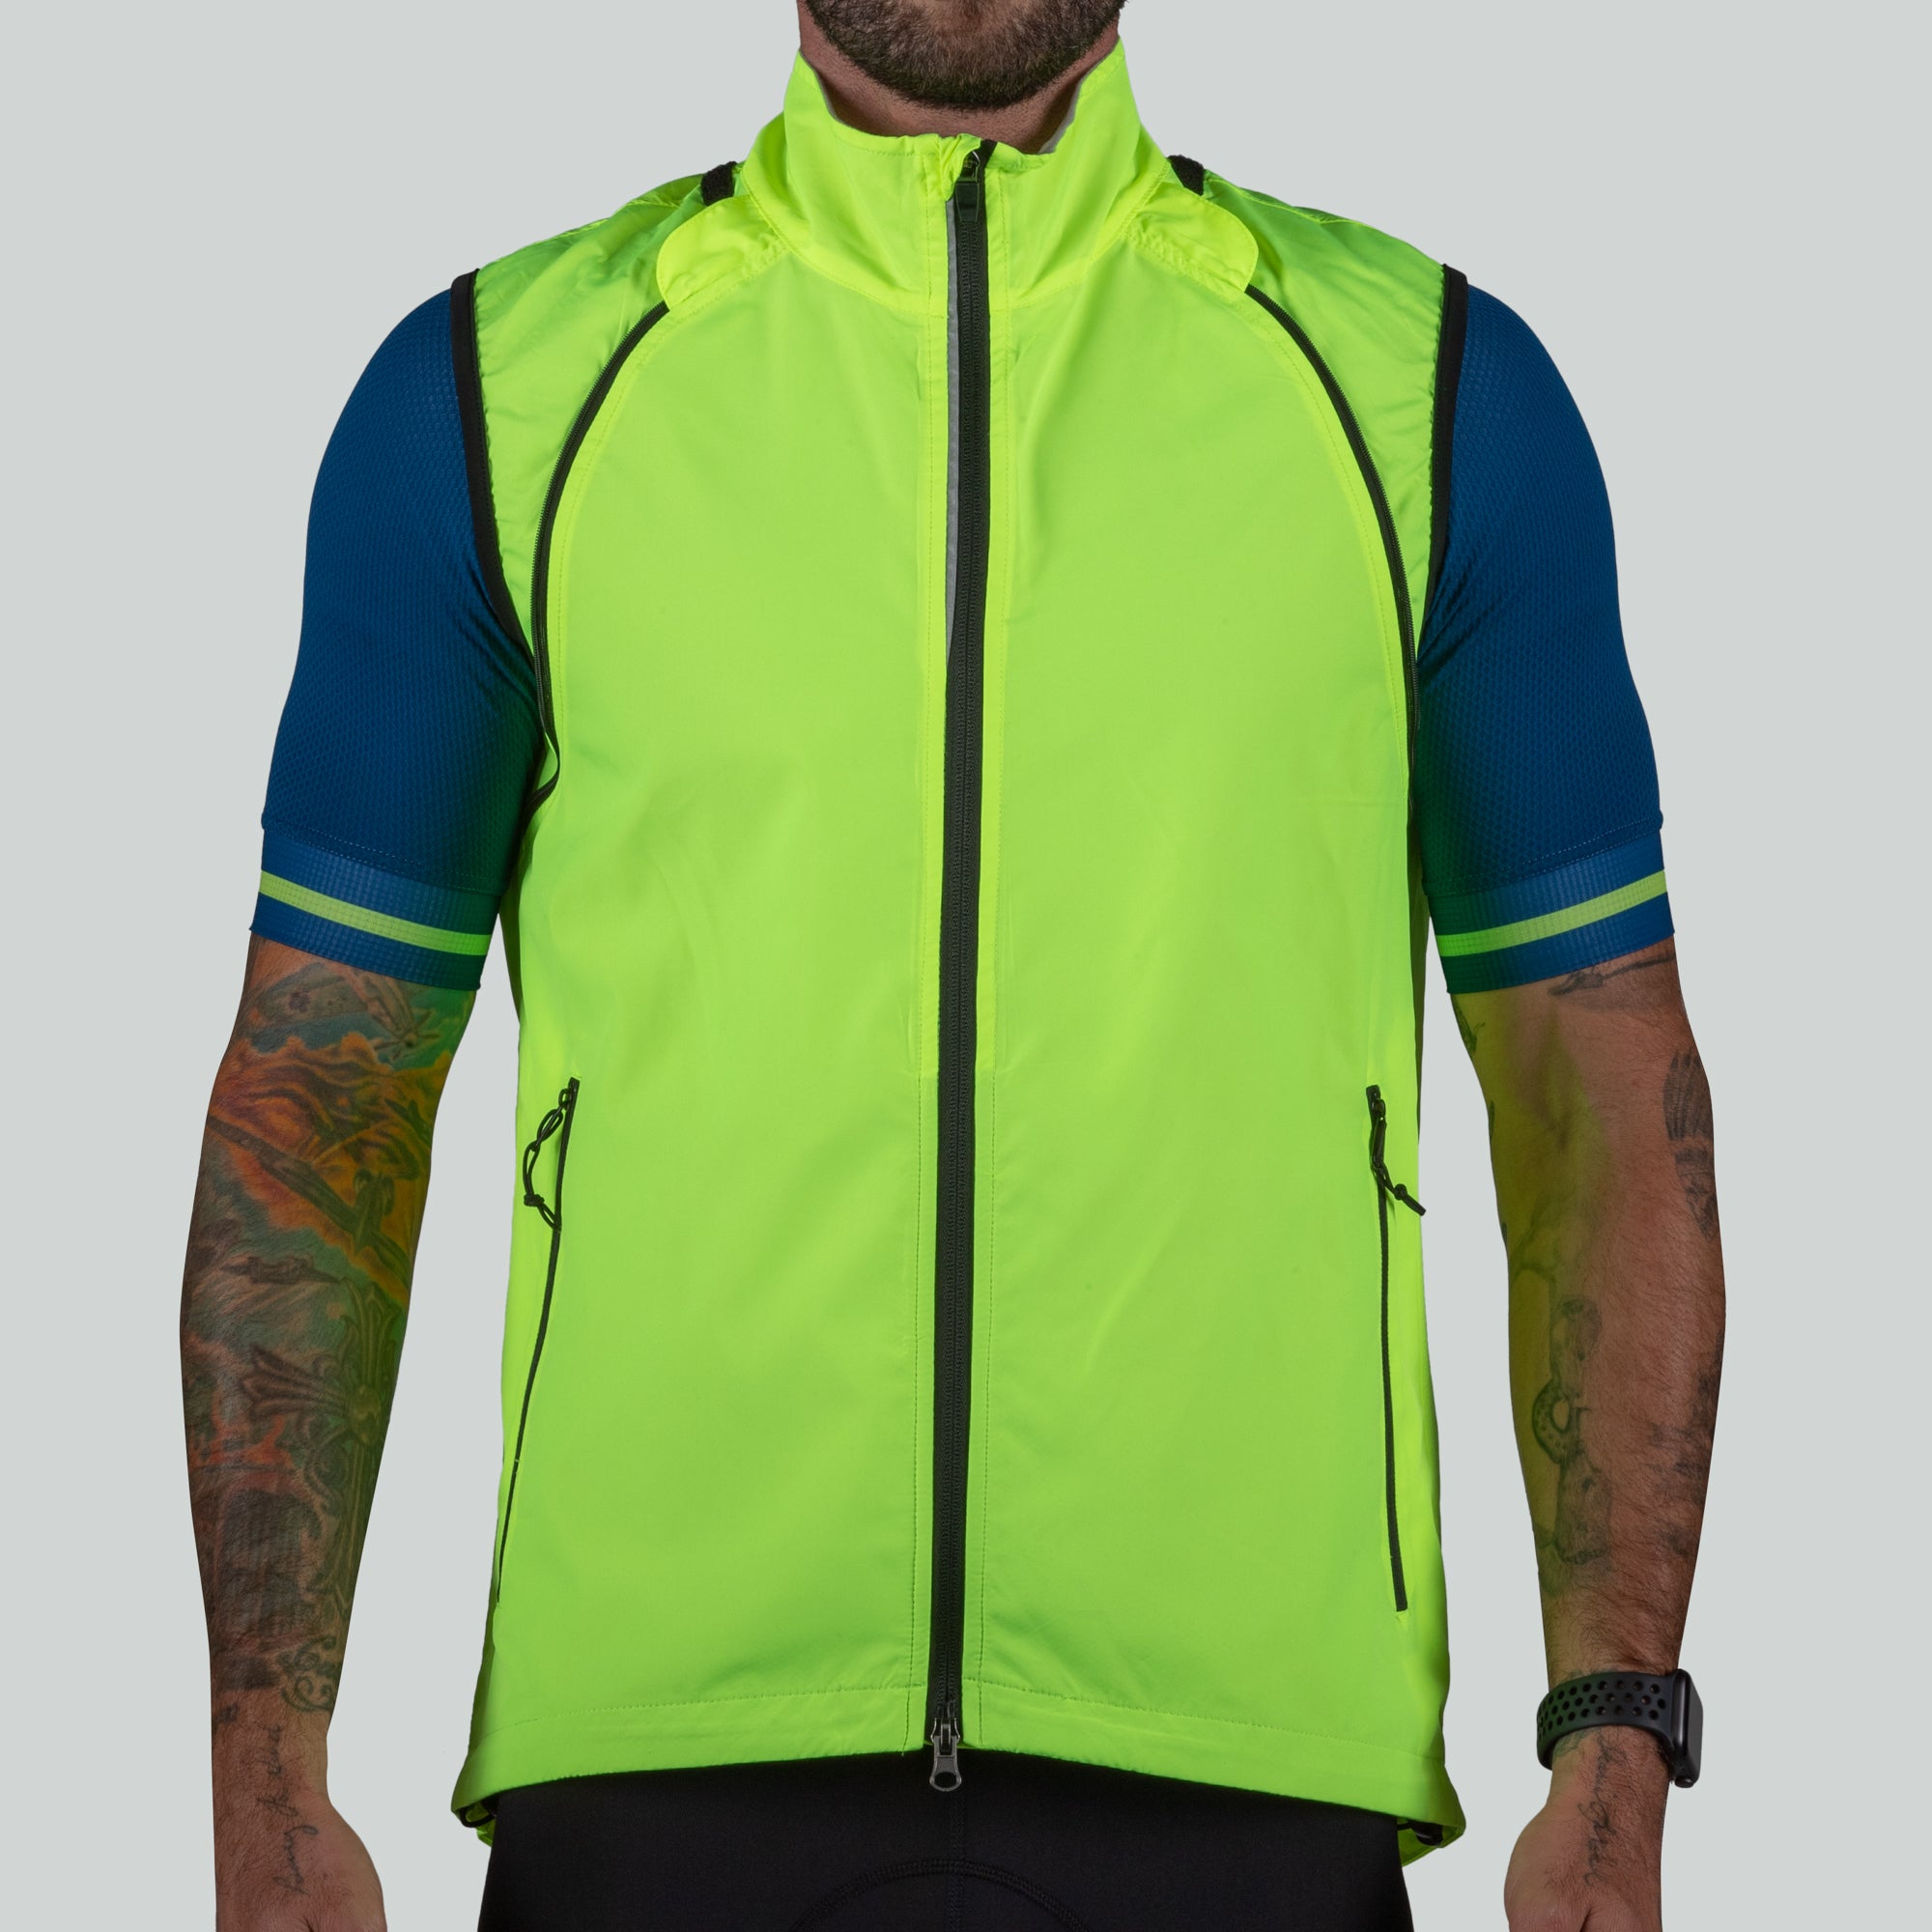 Velocity Jacket – Bellwether Convertible